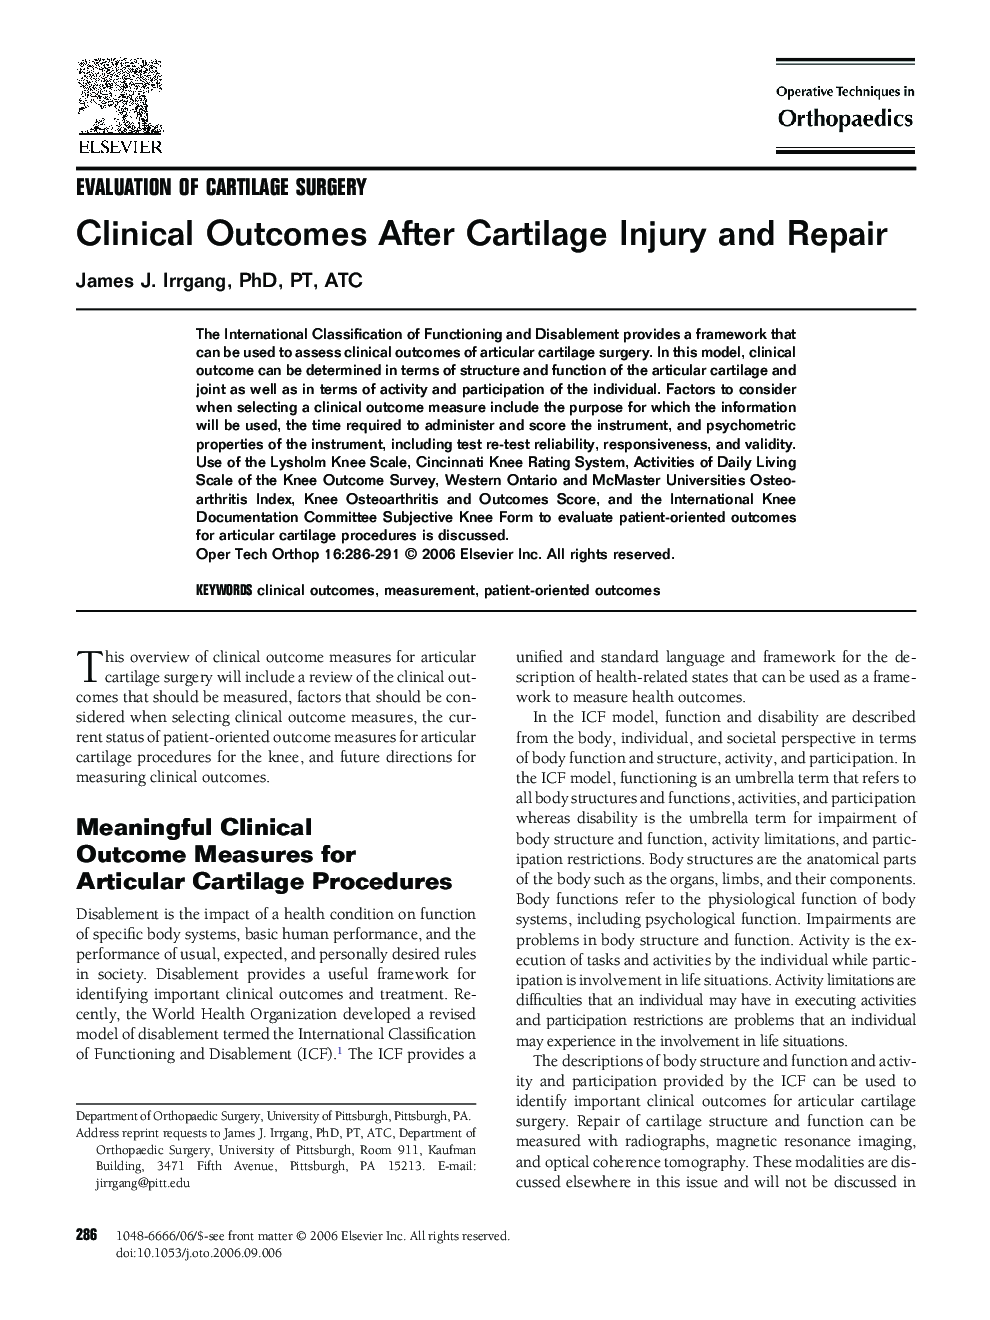 Clinical Outcomes After Cartilage Injury and Repair